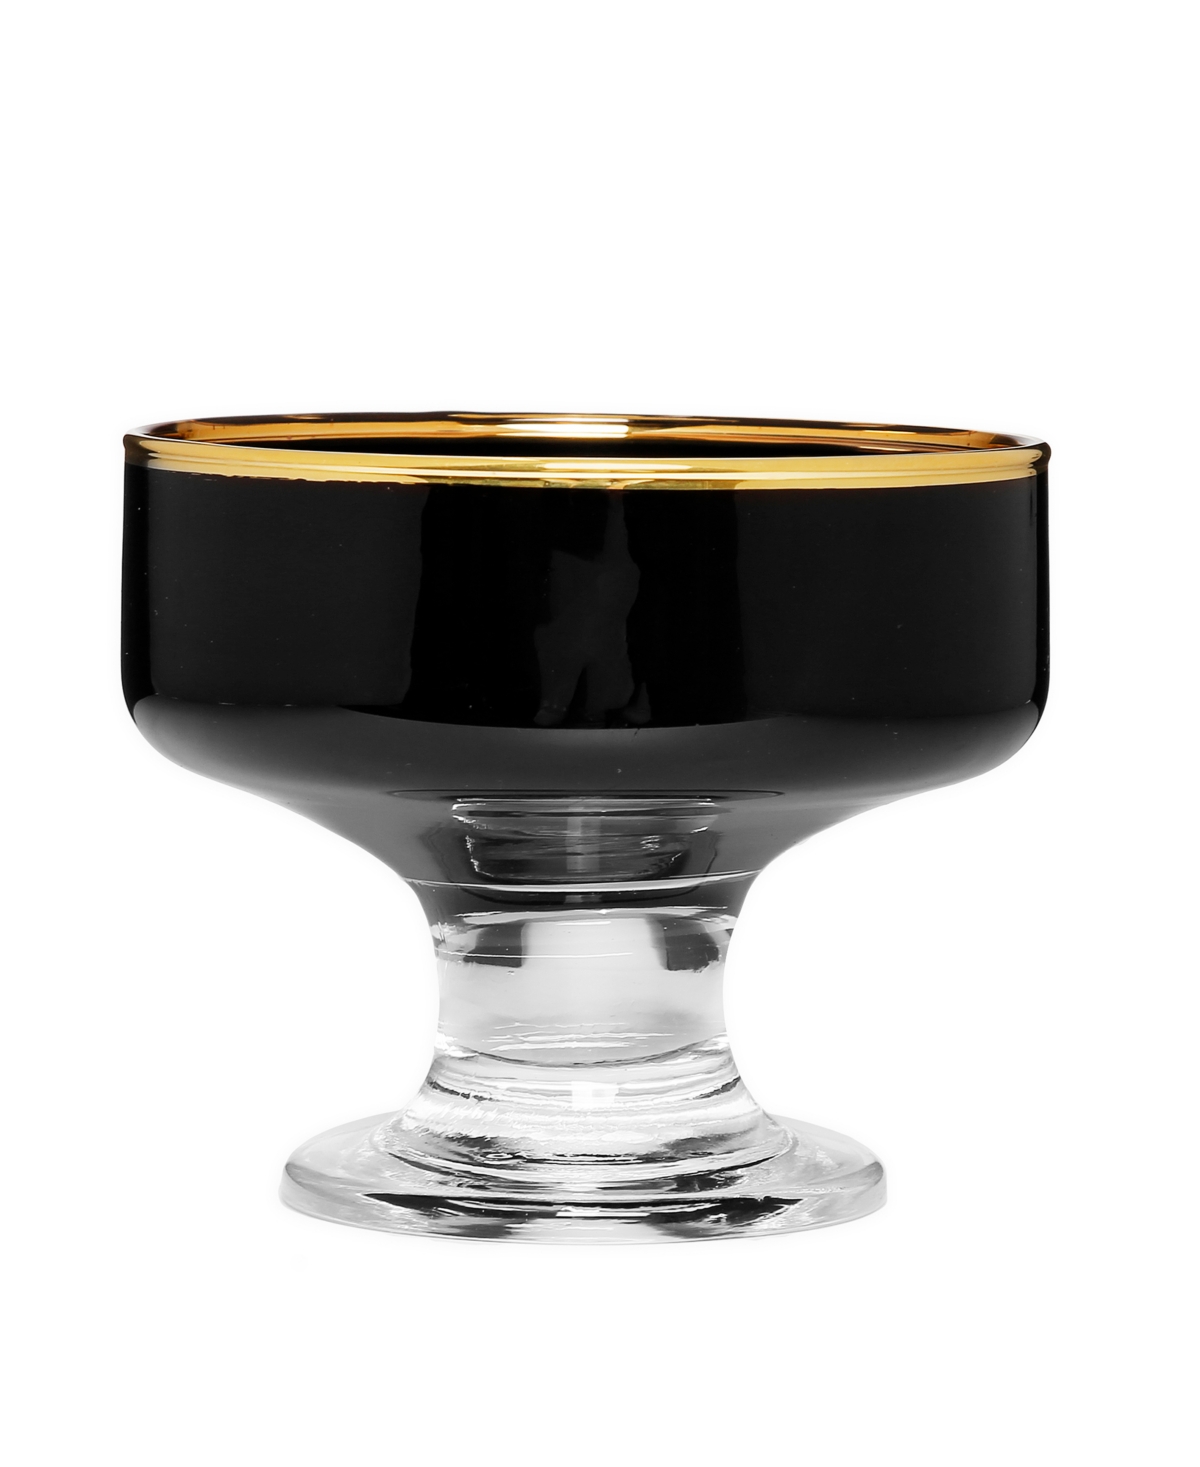 4" Dessert Cups with Stem and Colored Rim, Set of 6 - Black